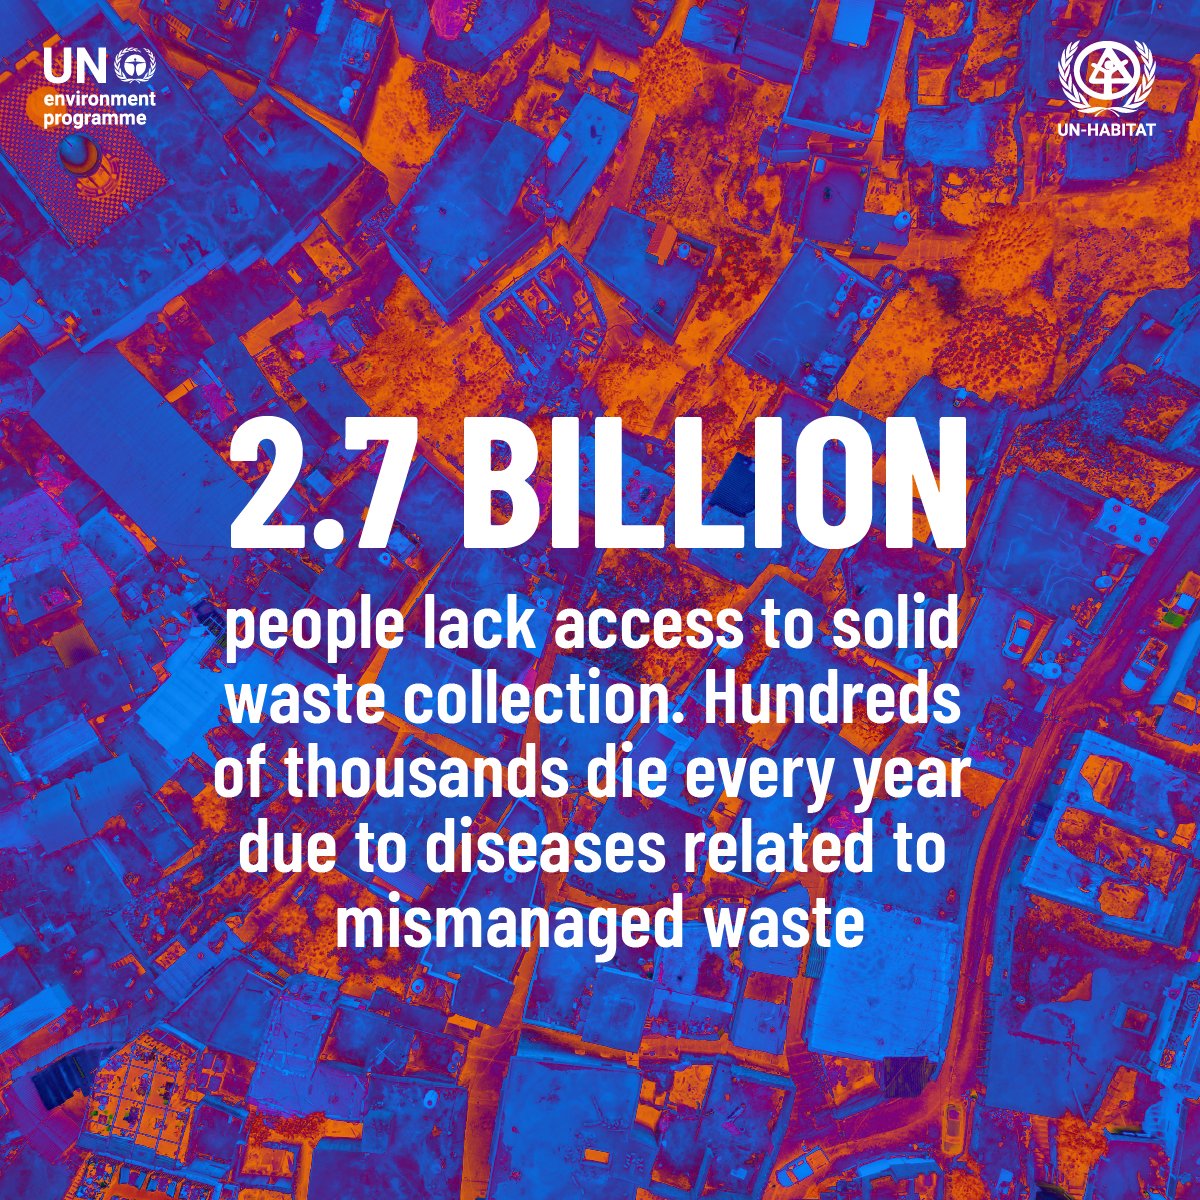 2.7 billion people lack access to waste collection.

Urgent action on all levels is needed to #BeatWastePollution & create a better future for all.

More from @UNEP on Saturday's #ZeroWasteDay: unep.org/events/un-day/…